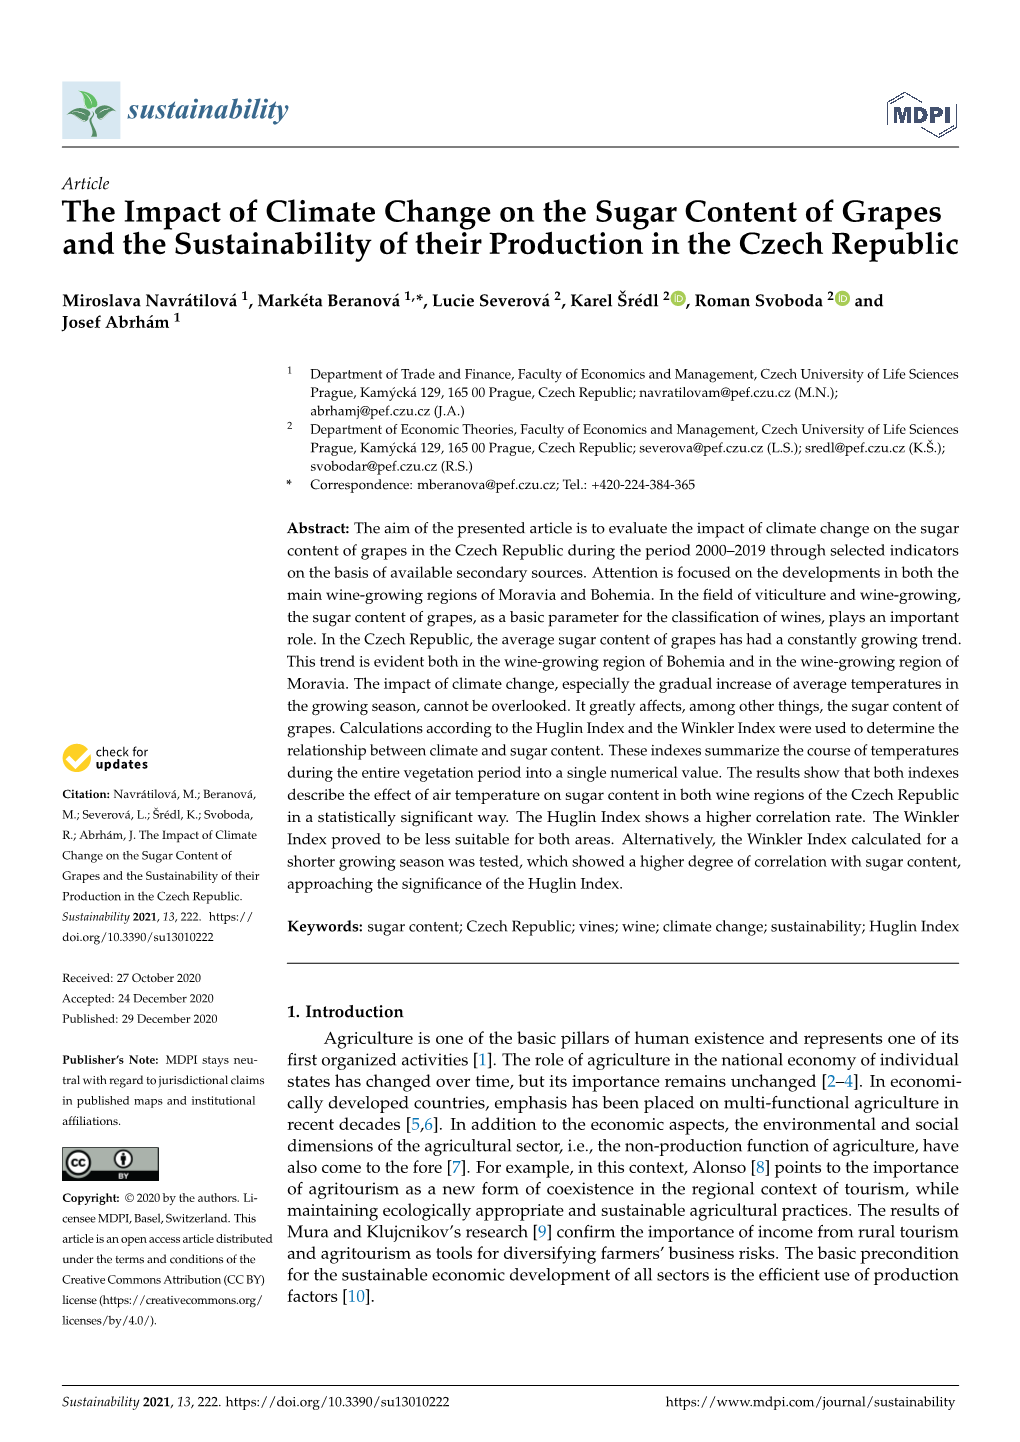 The Impact of Climate Change on the Sugar Content of Grapes and the Sustainability of Their Production in the Czech Republic